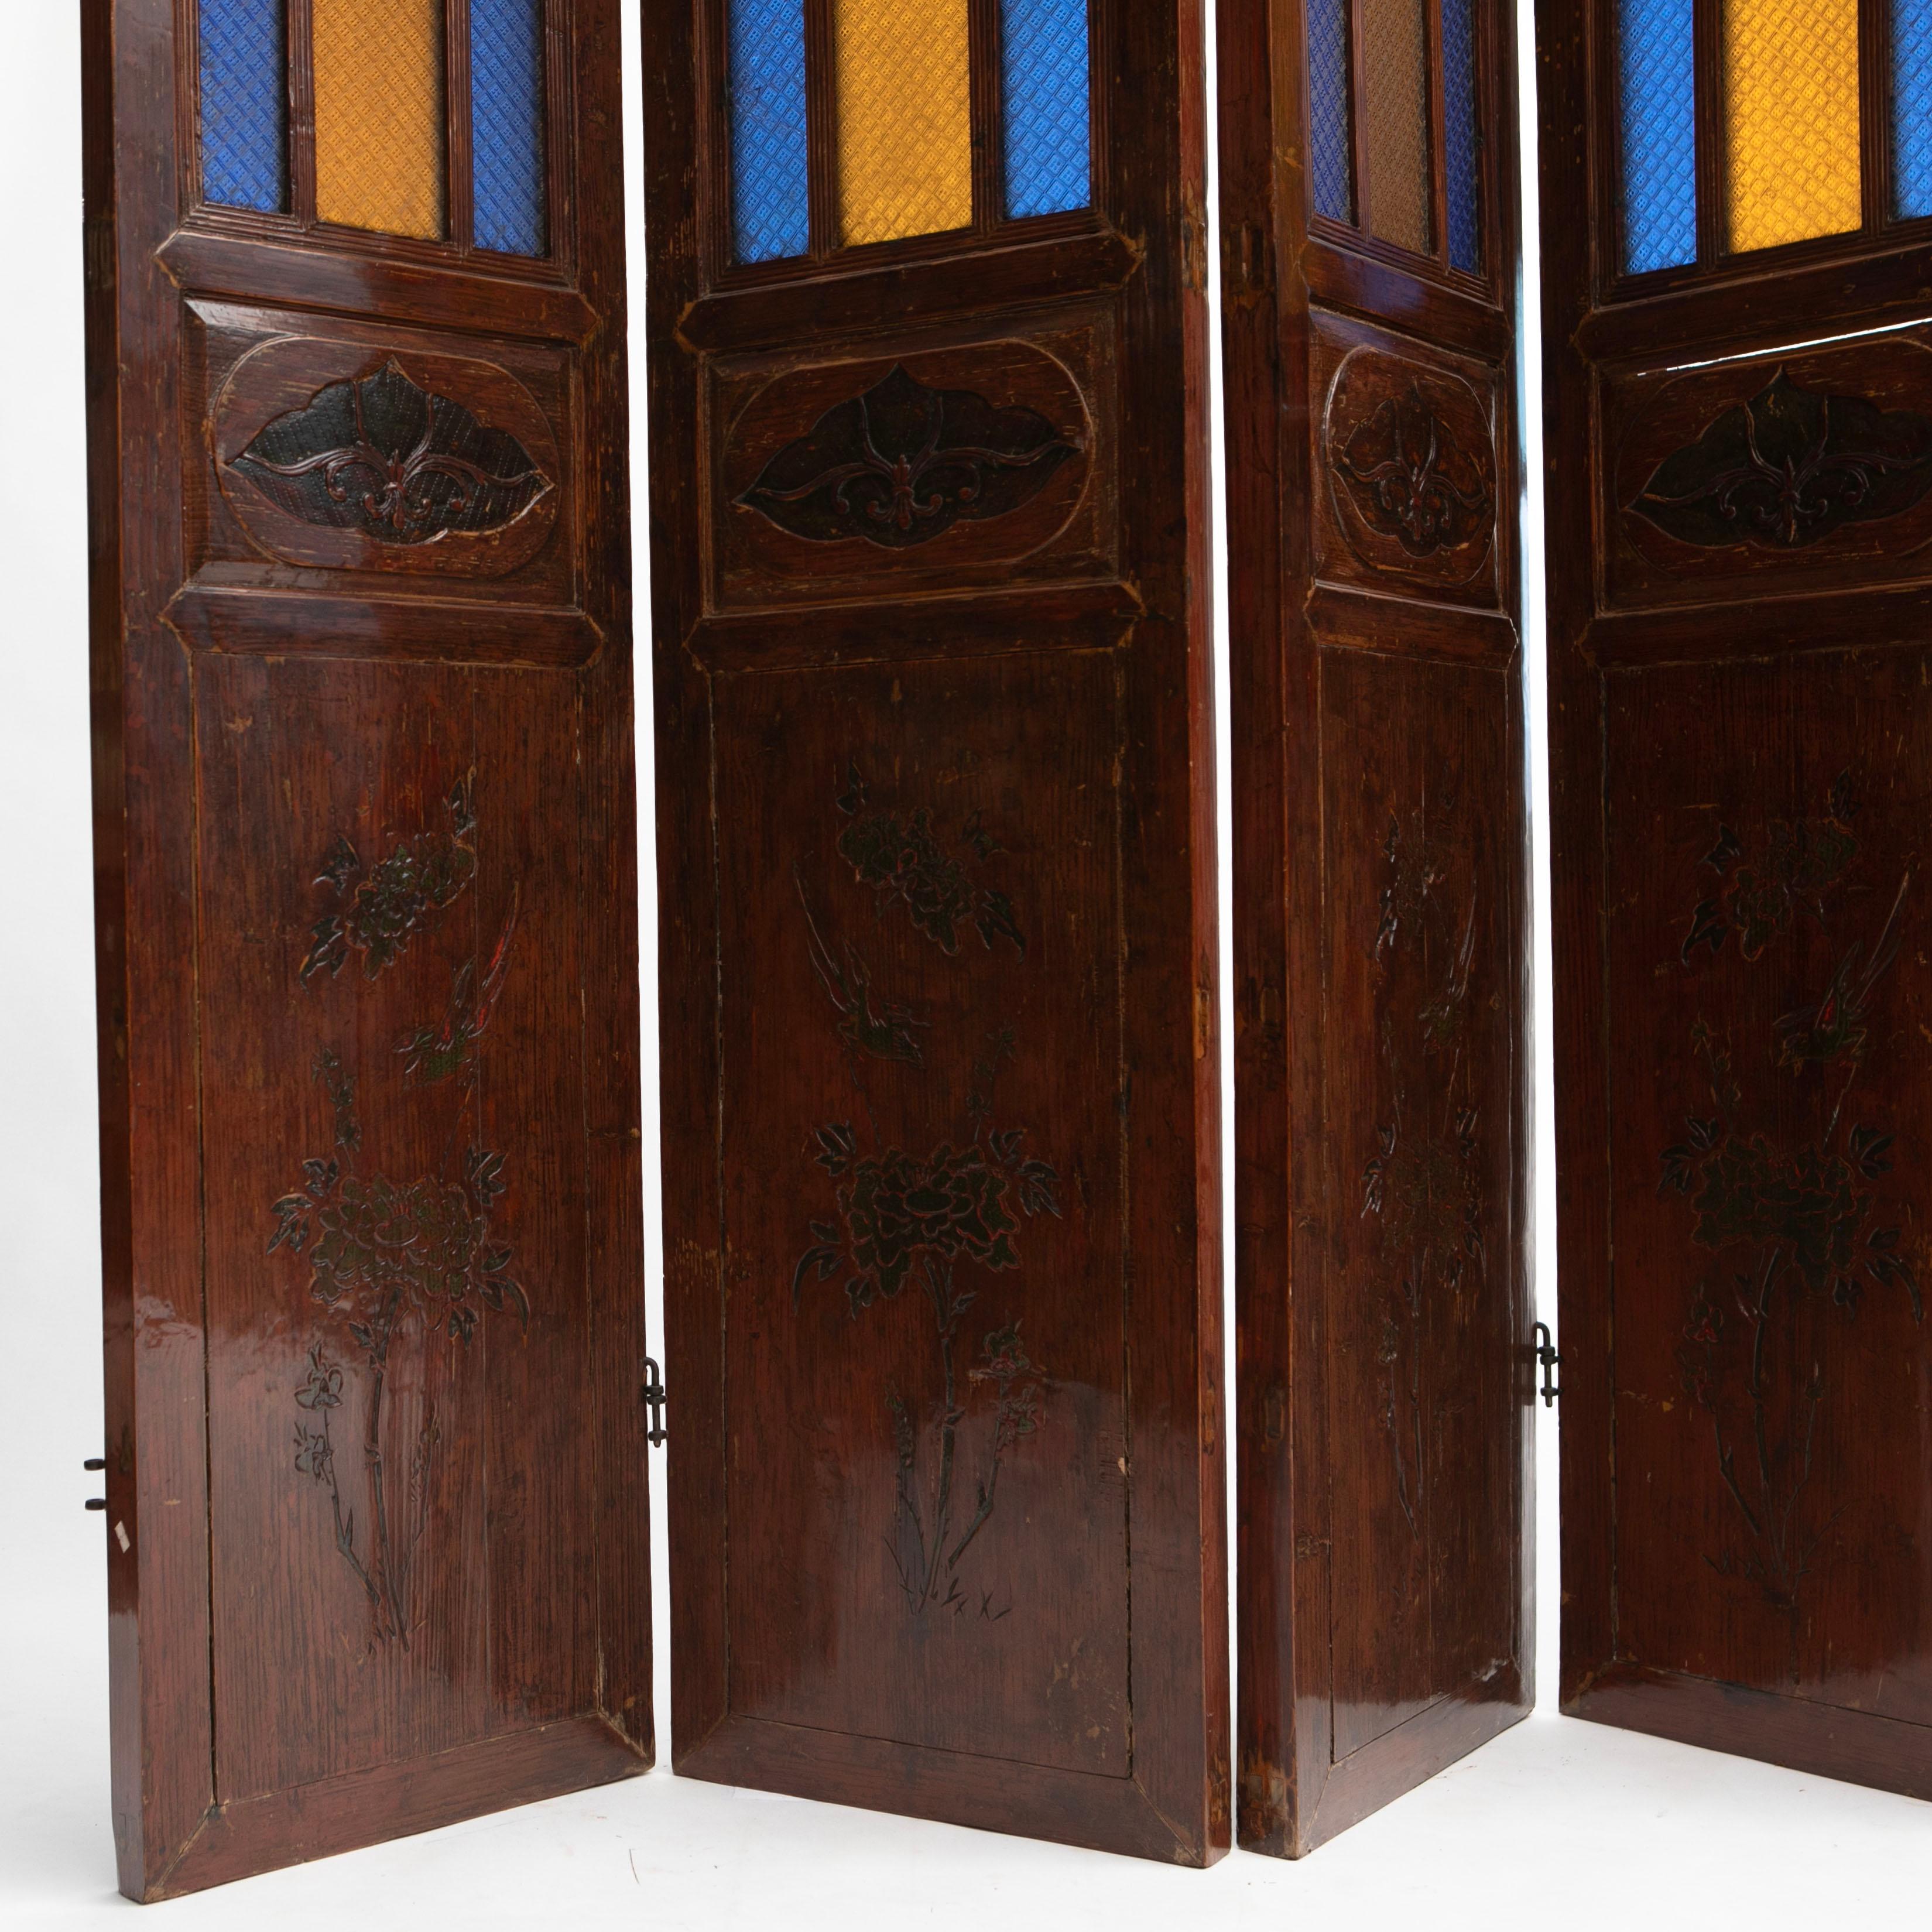 Chinese six-panel Art Nouveau room divider or screen.
Wood with original lacquer.
Each panel has 9 colored glass panels and is adorned with decorative wood carved decorations on the lower part of the screens. Original lacquer graced with a rich